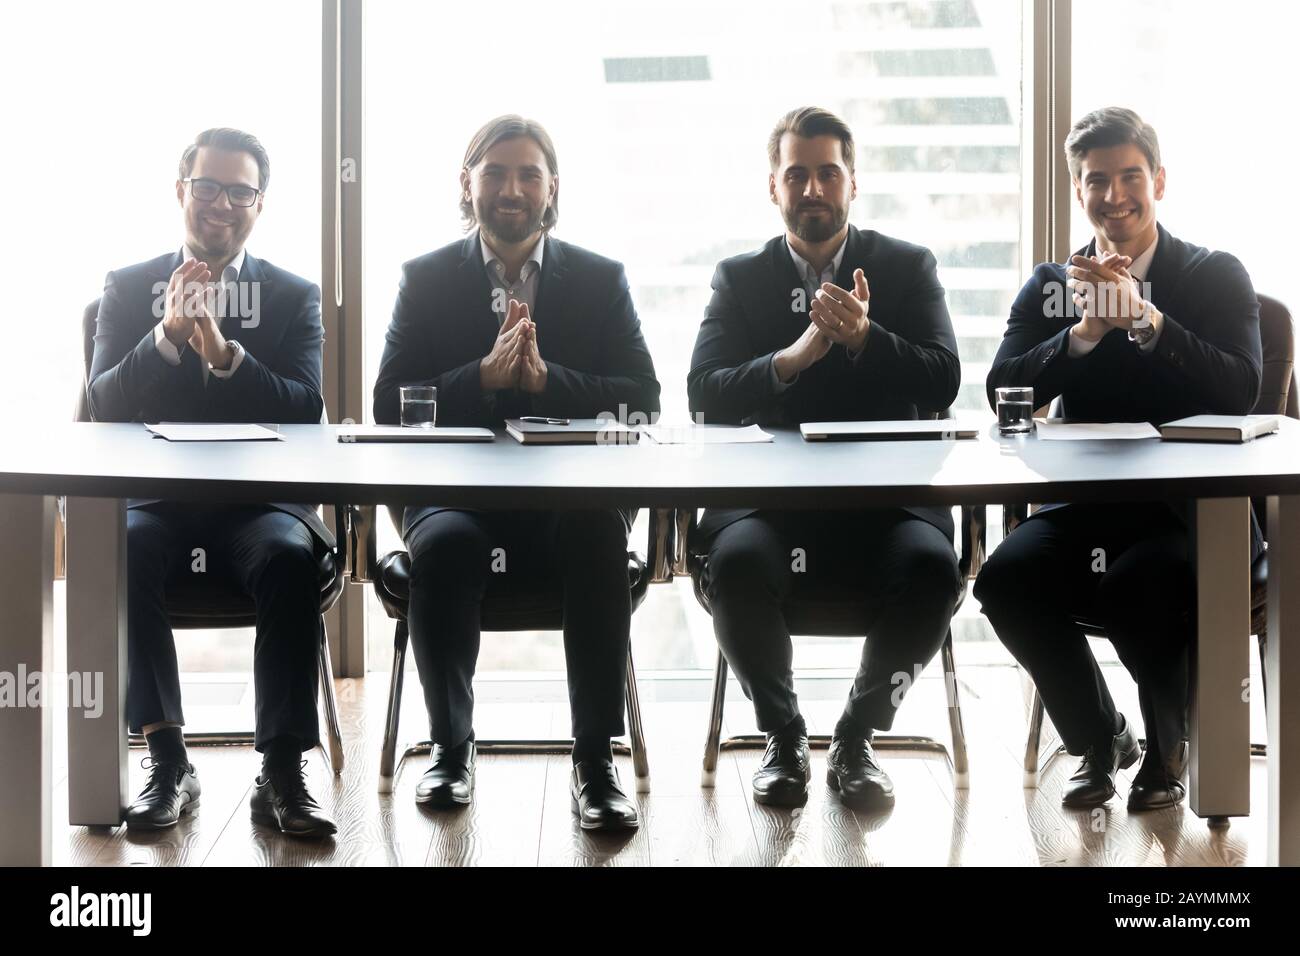 Happy businessmen with applicant resume clap hands for job. Stock Photo